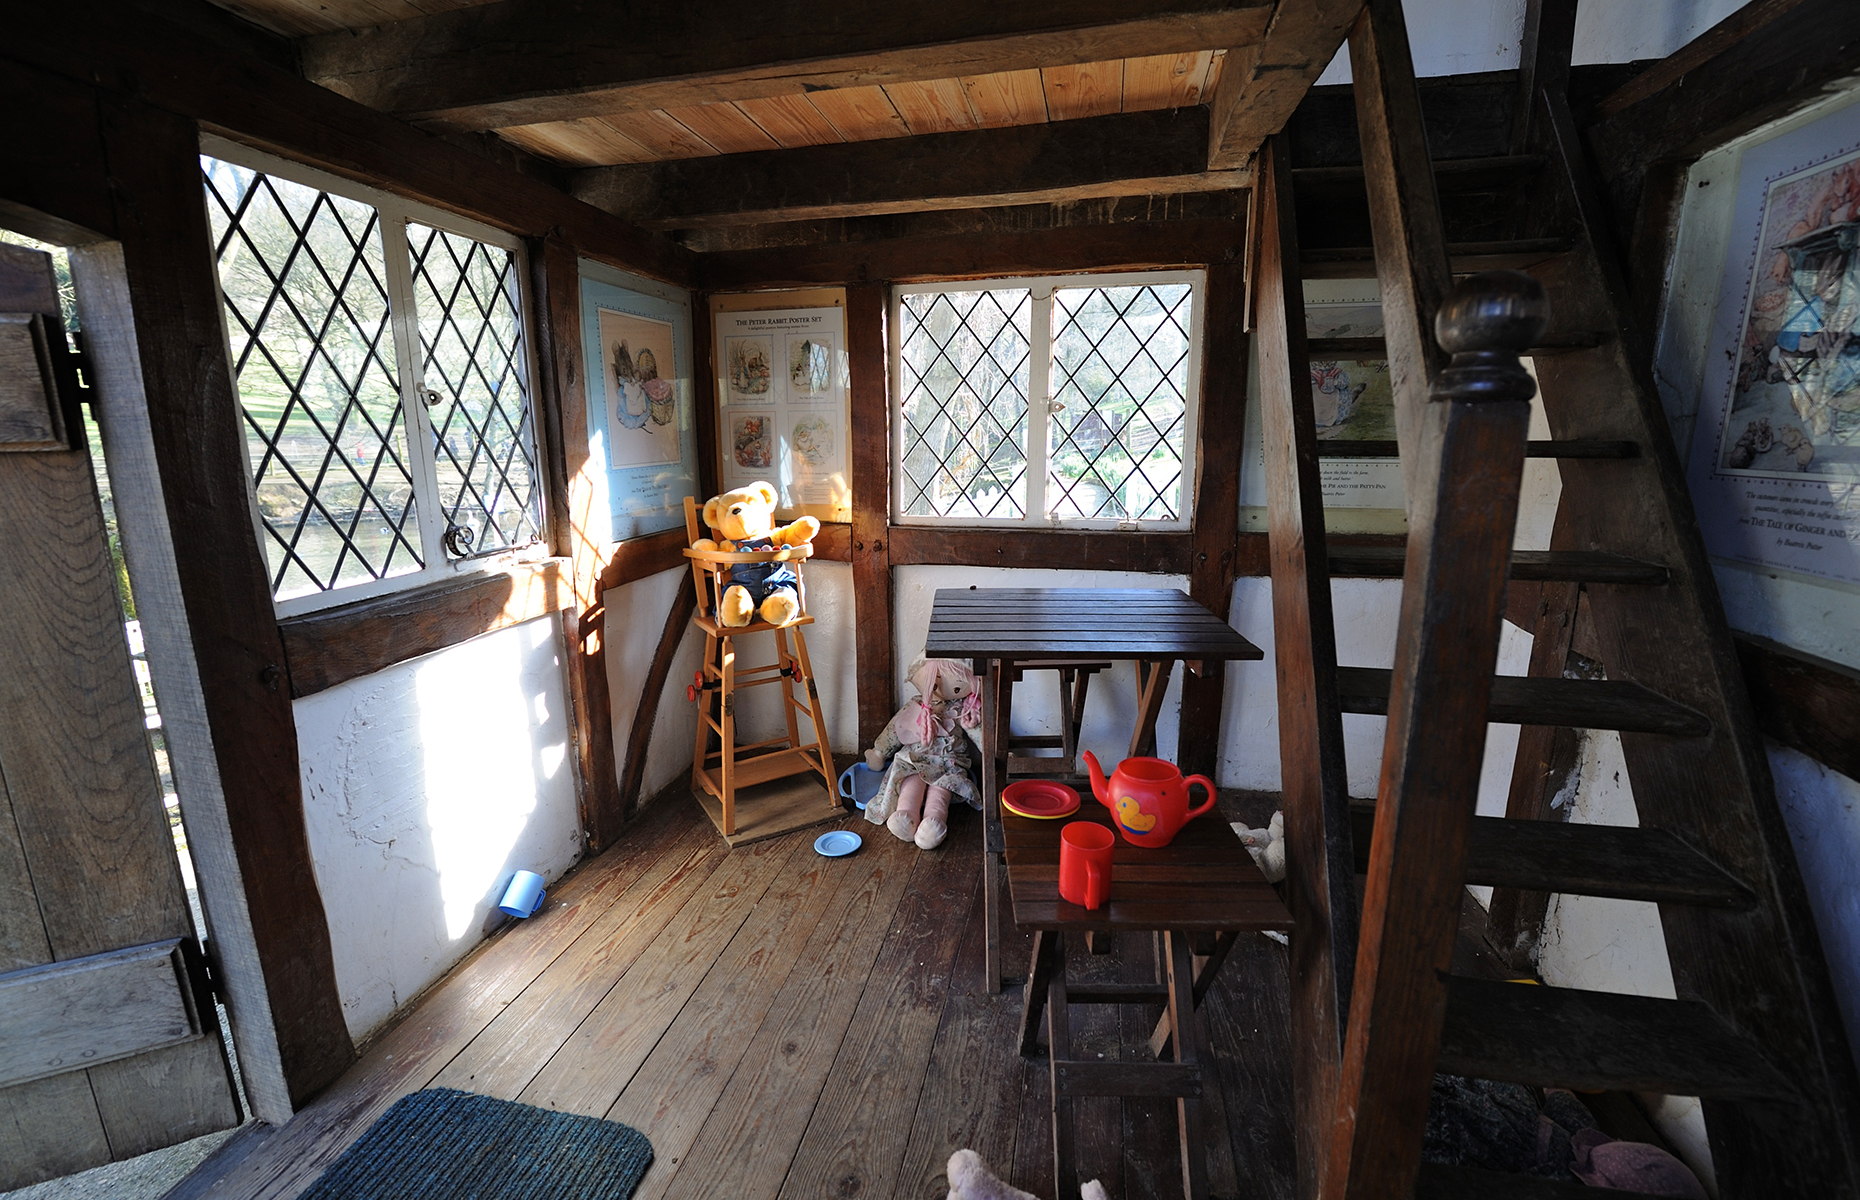 inside the wendy house